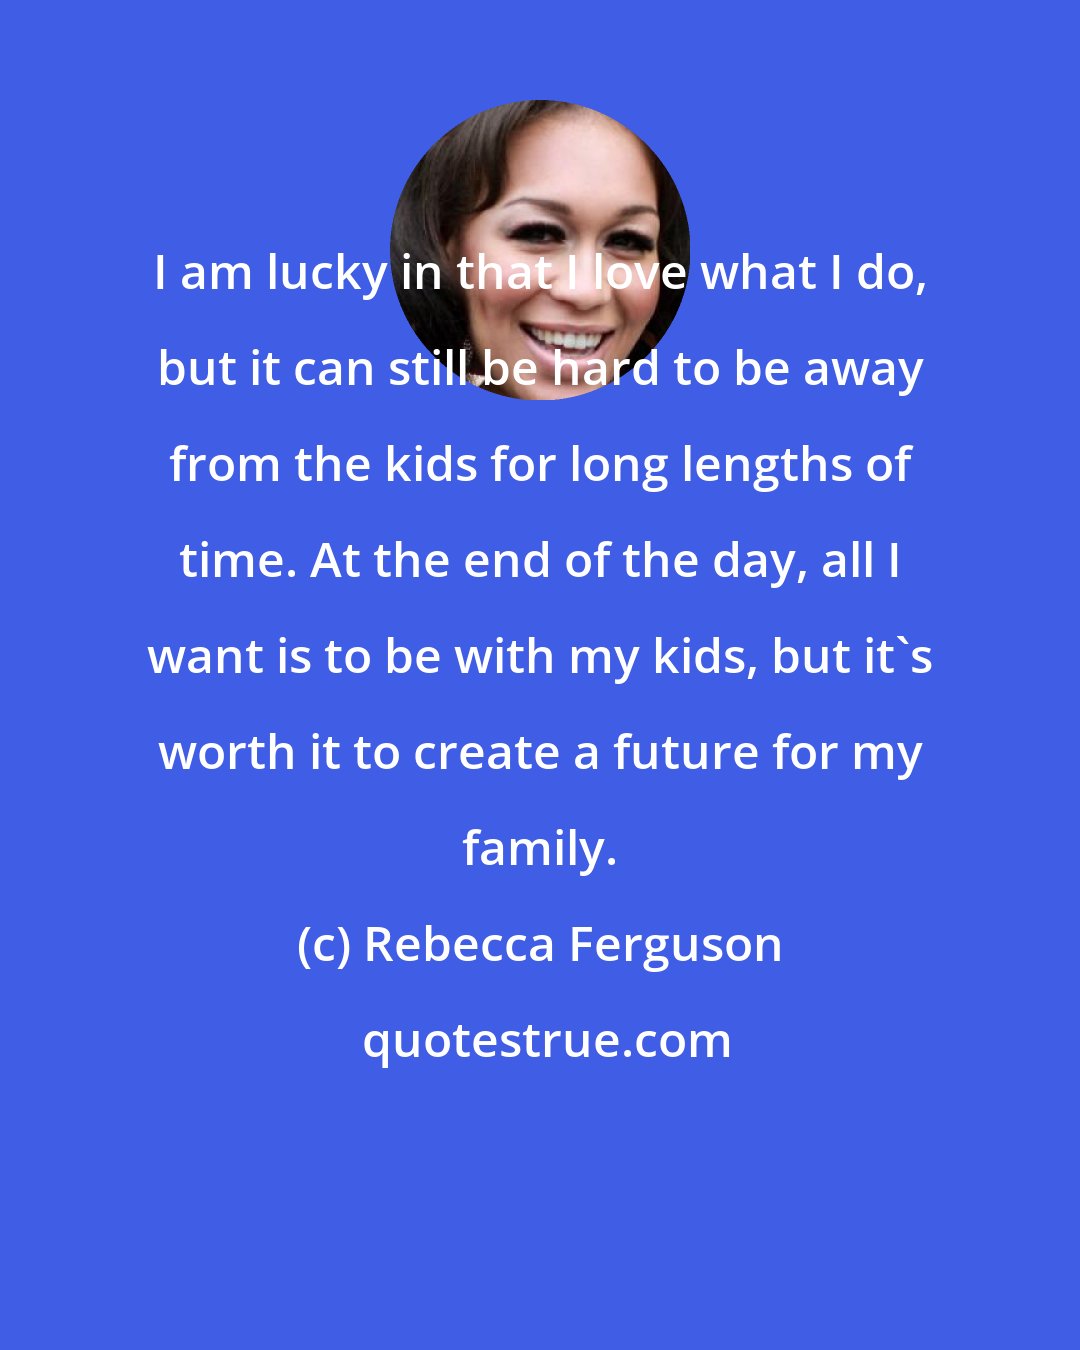 Rebecca Ferguson: I am lucky in that I love what I do, but it can still be hard to be away from the kids for long lengths of time. At the end of the day, all I want is to be with my kids, but it's worth it to create a future for my family.